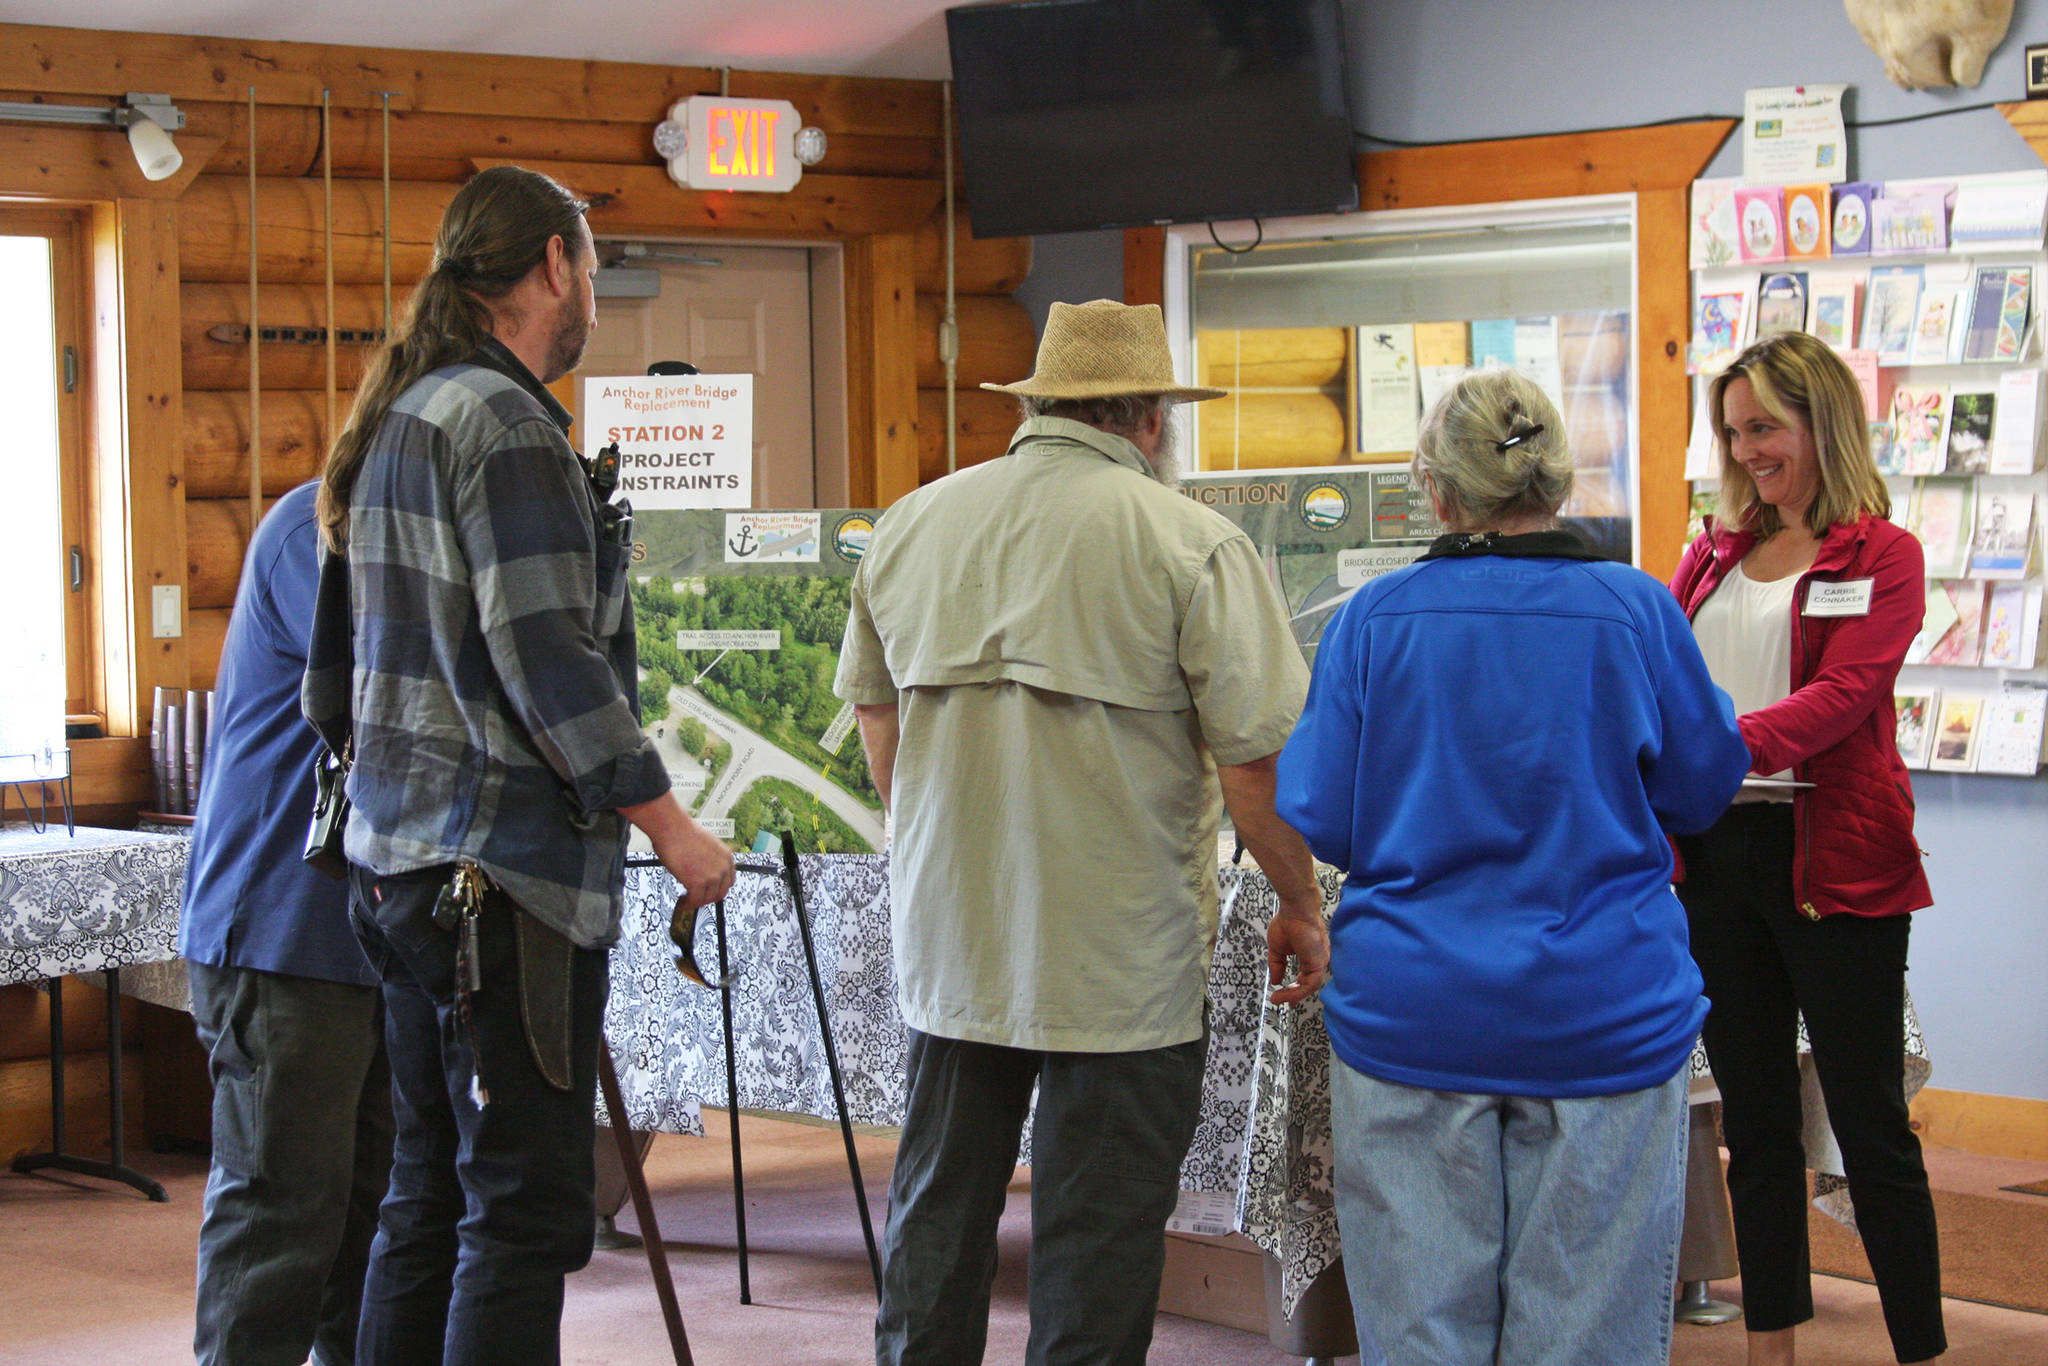 Local Anchor Point residents view the presentation and chat with Carrie Connaker from Solstice Alaska Consulting, Inc., at the open house for the Anchor River Bridge replacement project on Tuesday, Aug. 20, 2019 at the Anchor Point Senior Center in Anchor Point, Alaska. (Photo by Delcenia Cosman)